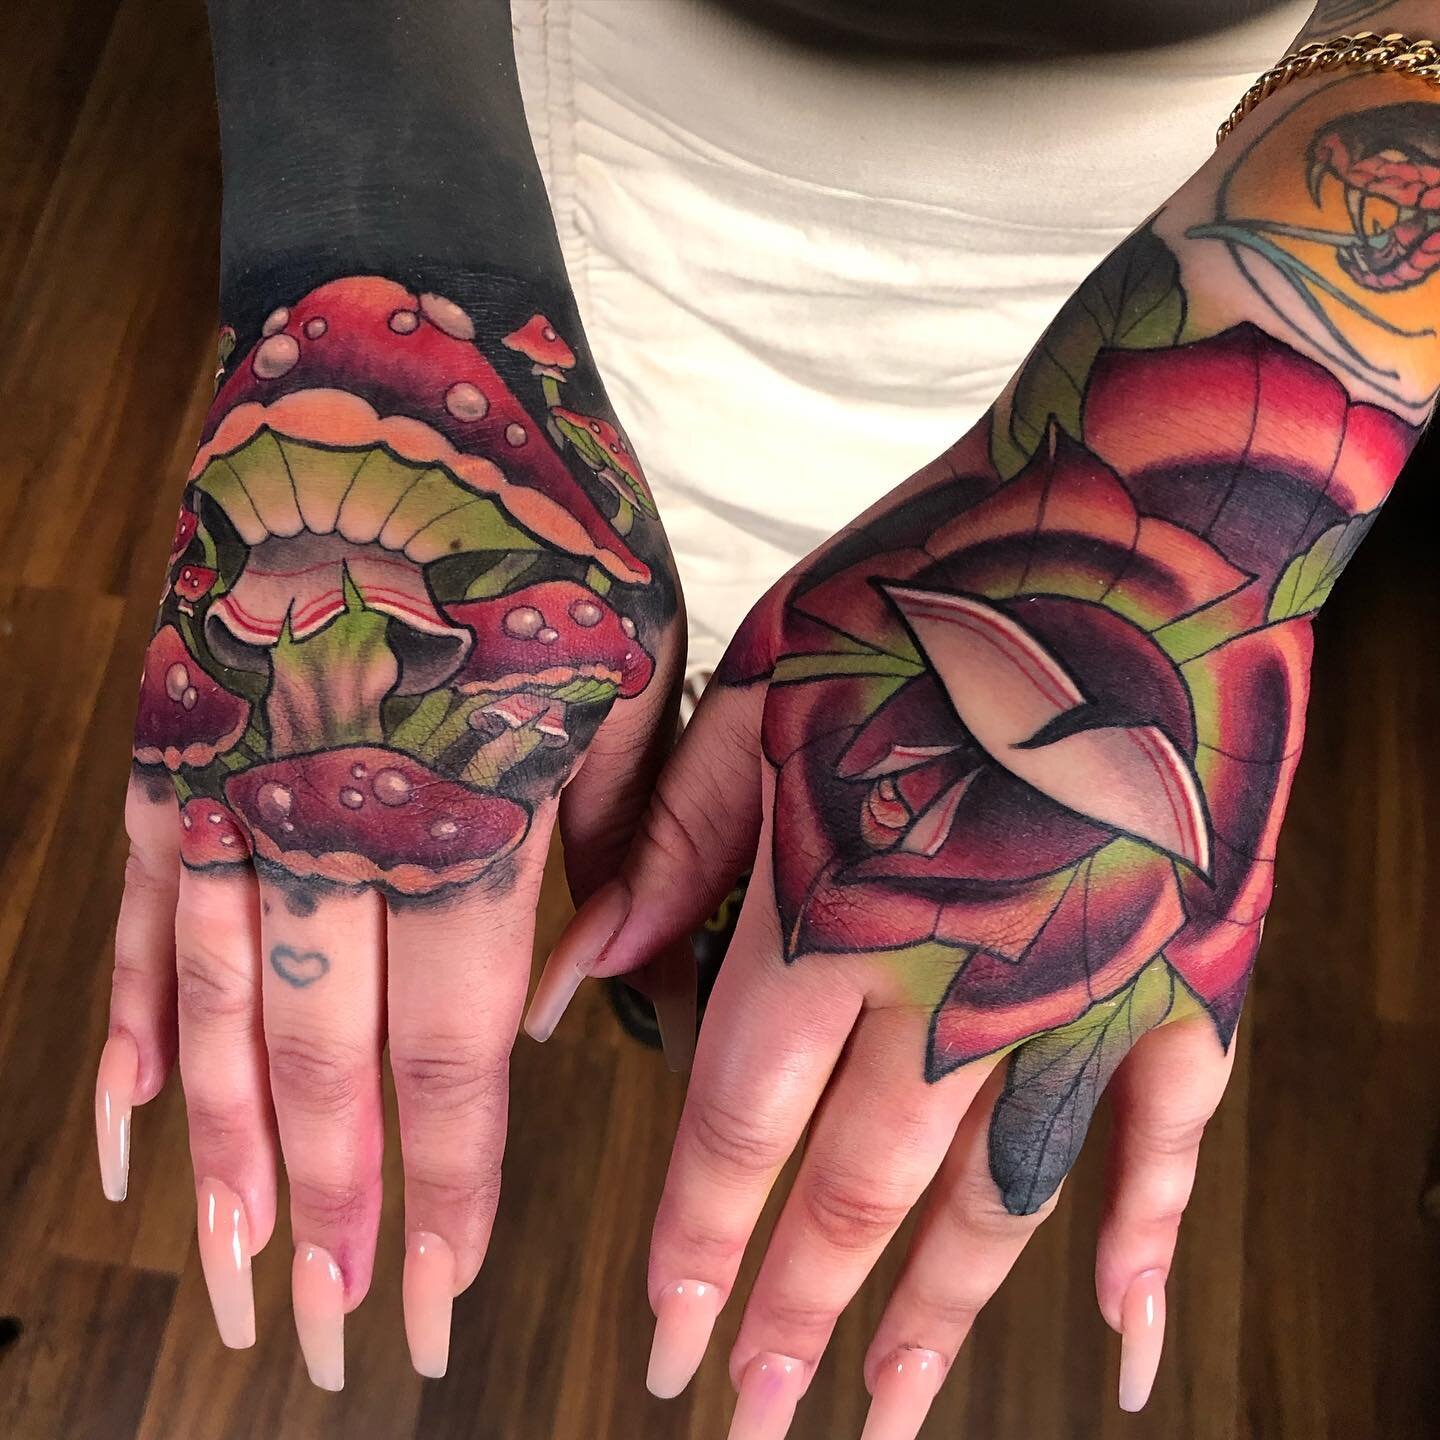 &ldquo;I want mushrooms and a flower&rdquo;🍄🌹 Done deal. Two hands, one day. Lots of fun. Thanks again, Anessa 👊🏼 you are tough as fuck! 
&bull;
I really love doing my style of roses and am always down for mushies stuff soooo hit me up to get som